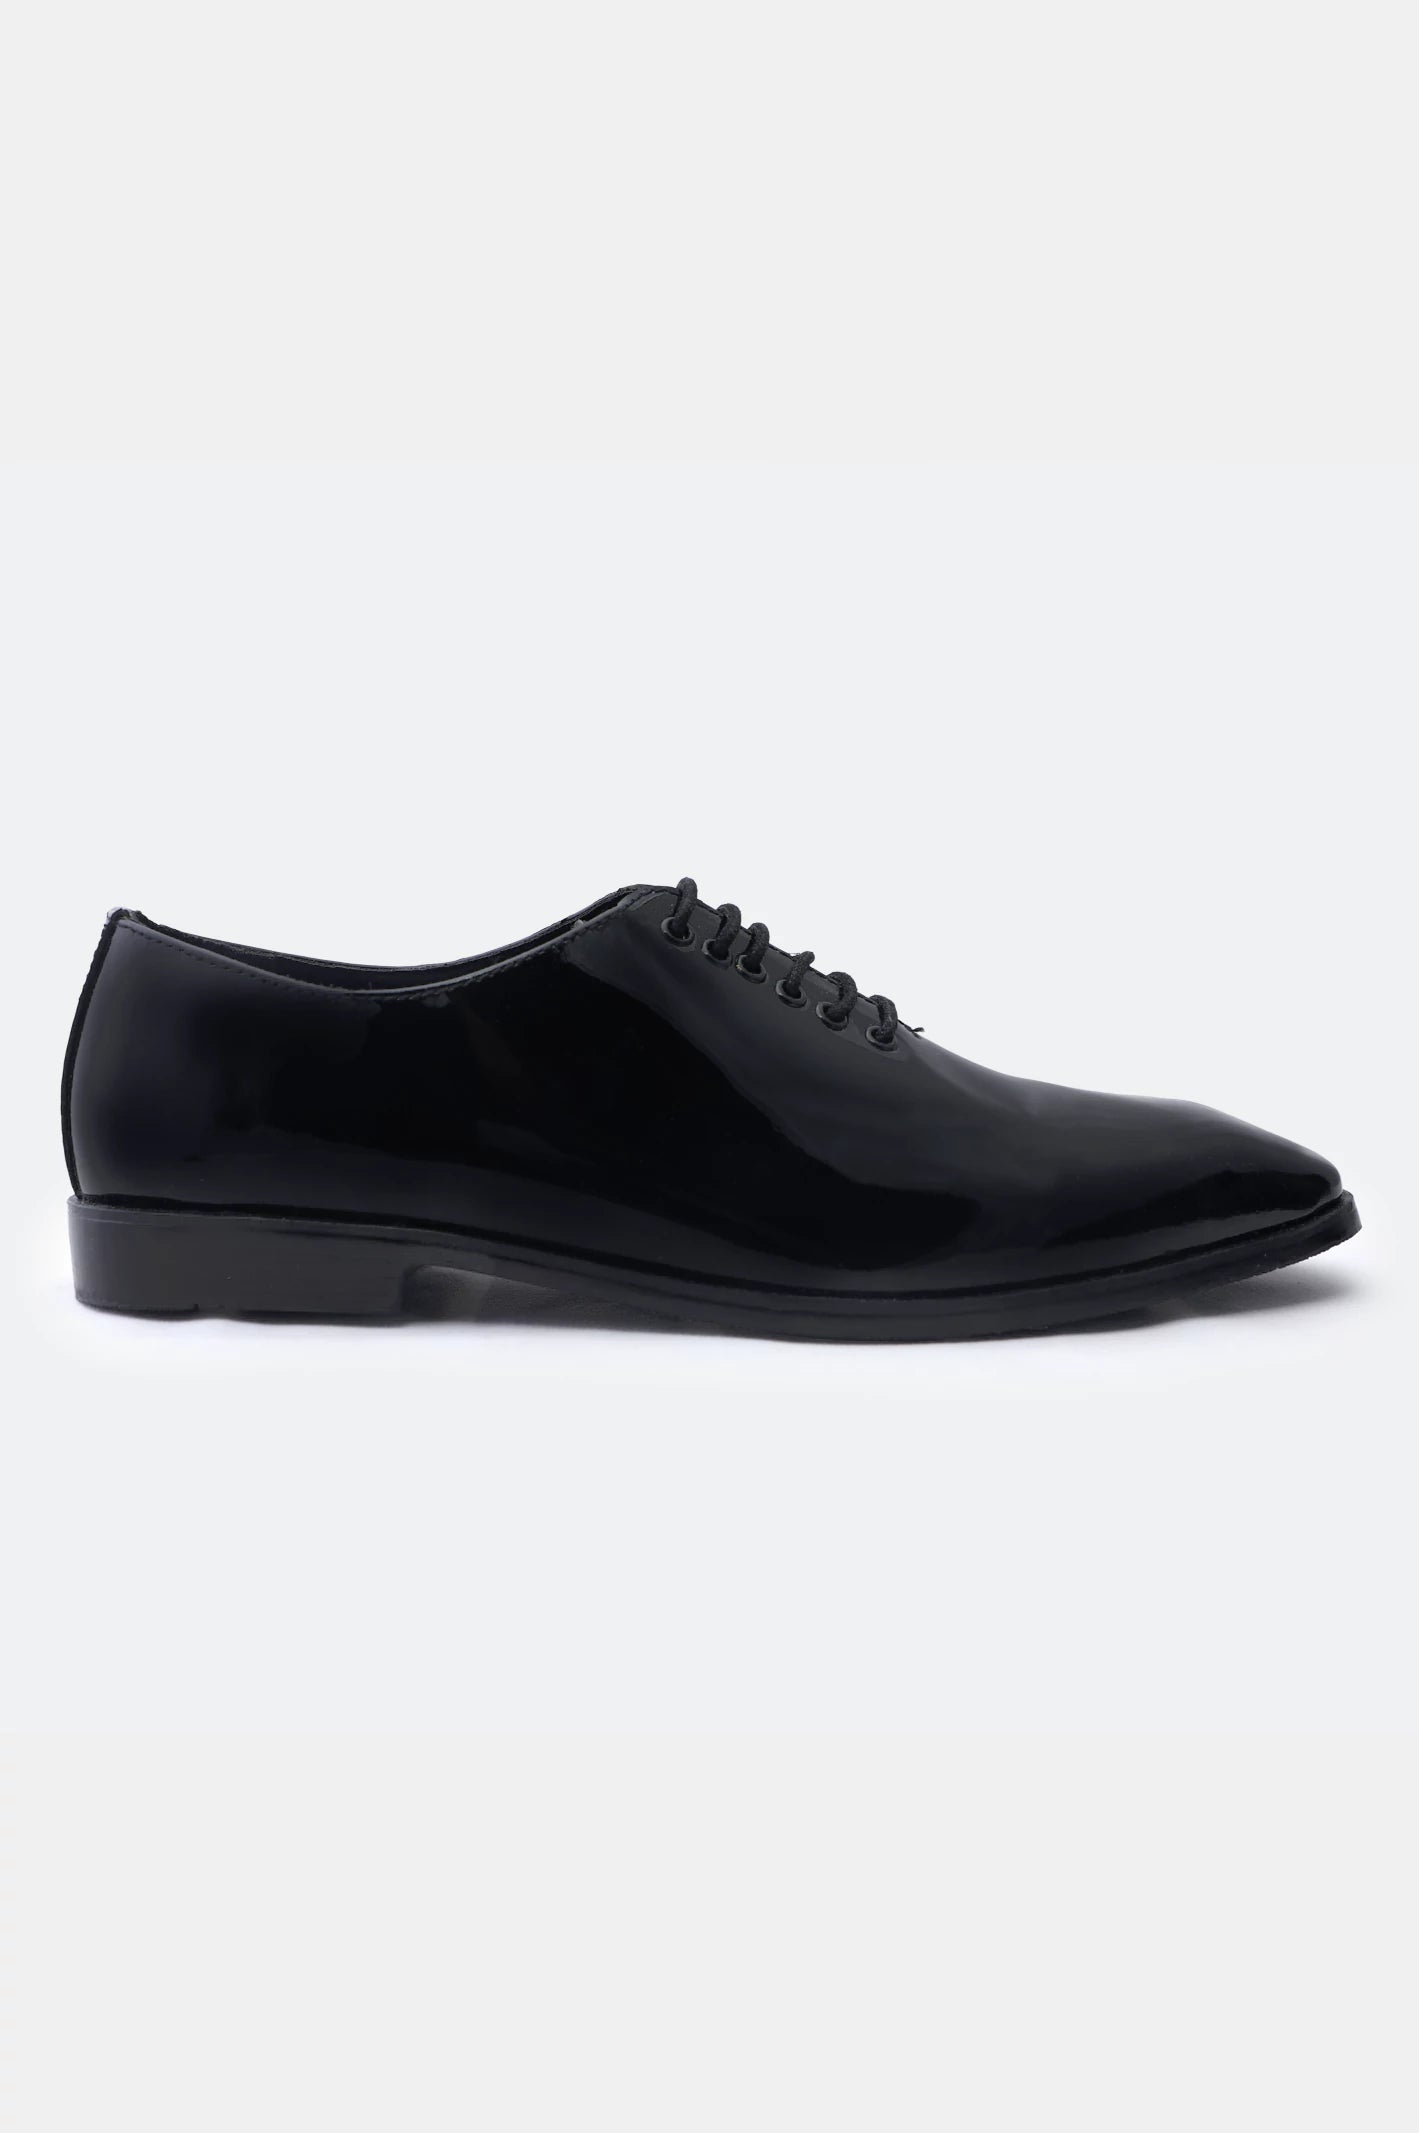 Formal Shoes For Men From Diners